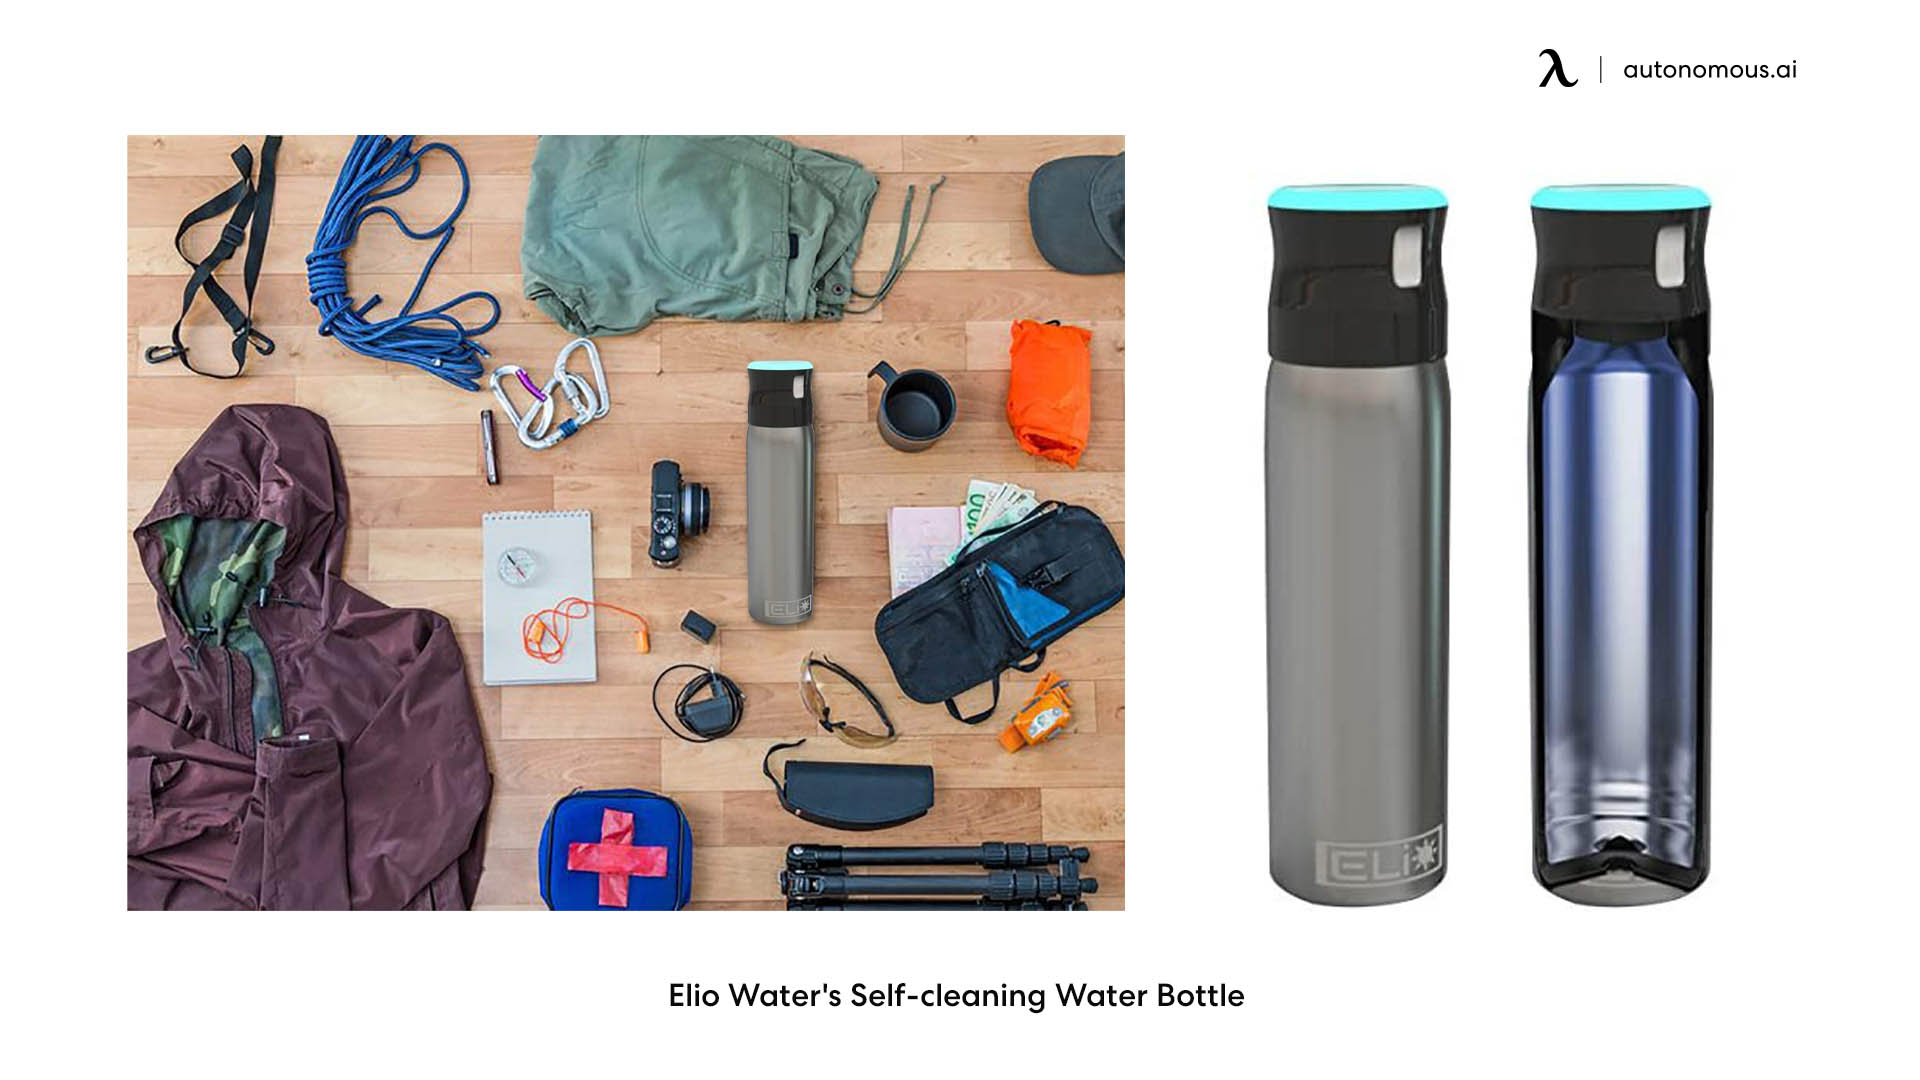 Elio Water's Self-cleaning Water Bottle